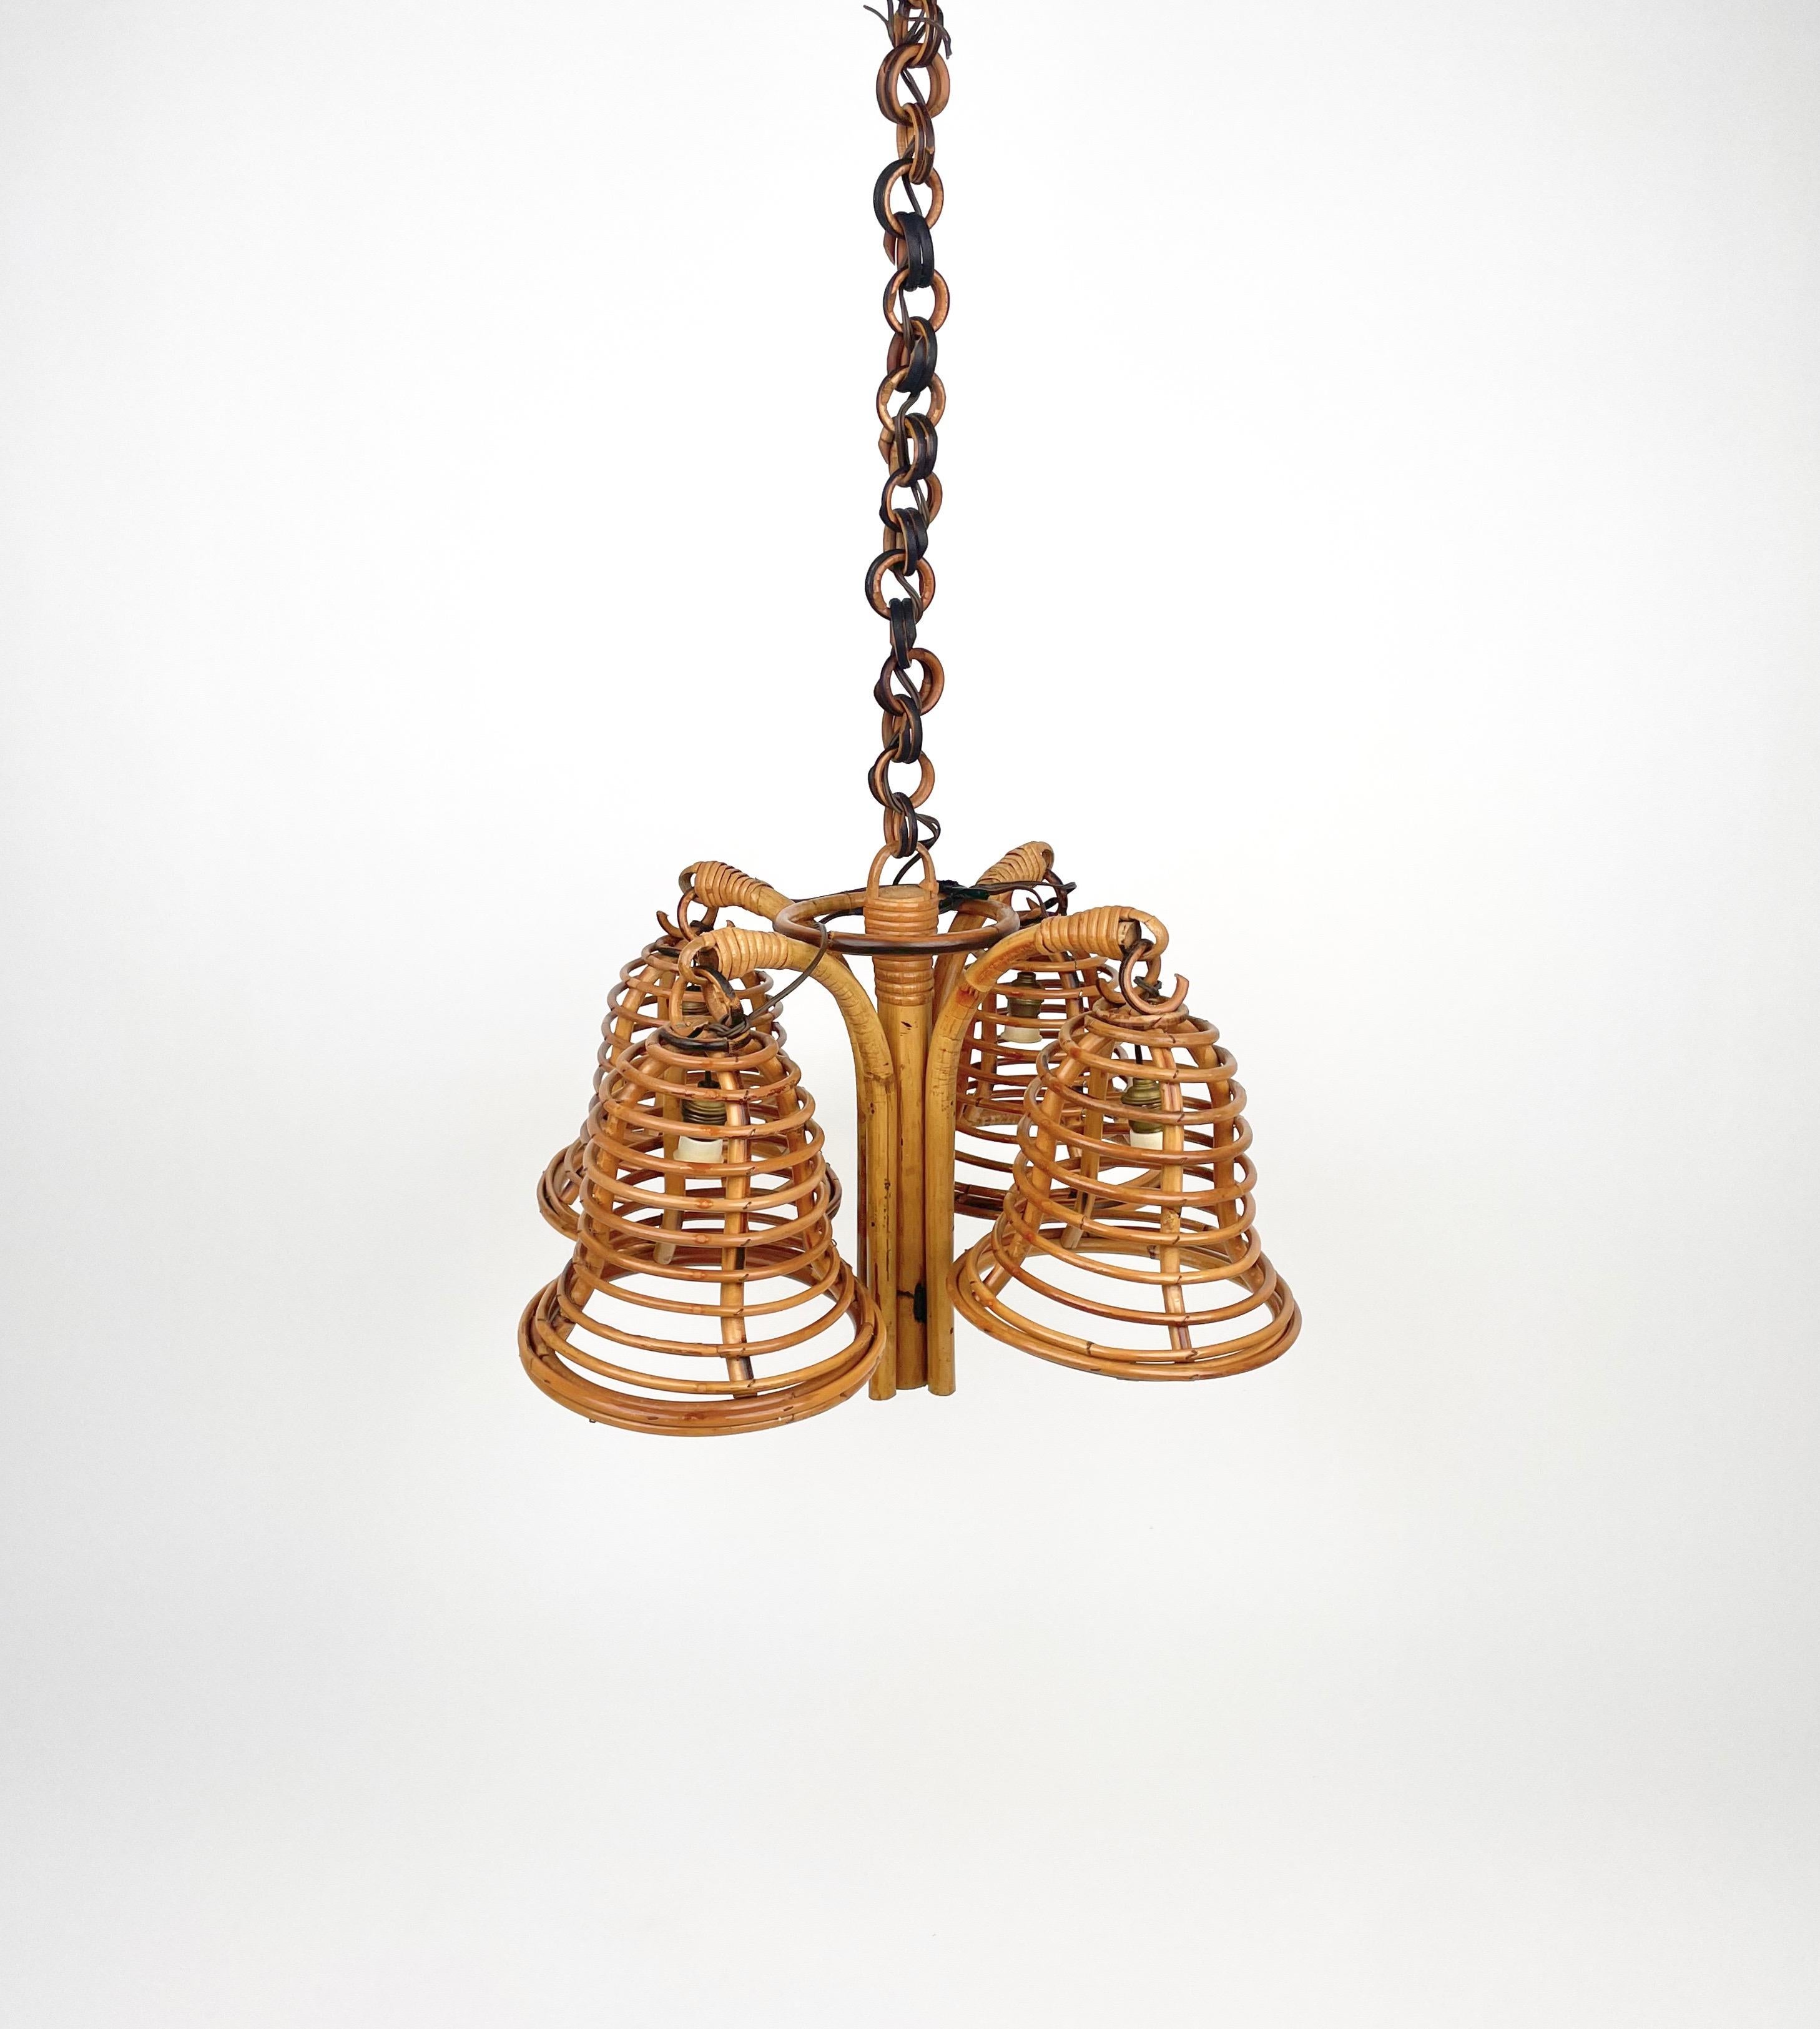 Rattan & Bamboo Chandelier Pendant Louis Sognot Style, Italy 1960s For Sale 1